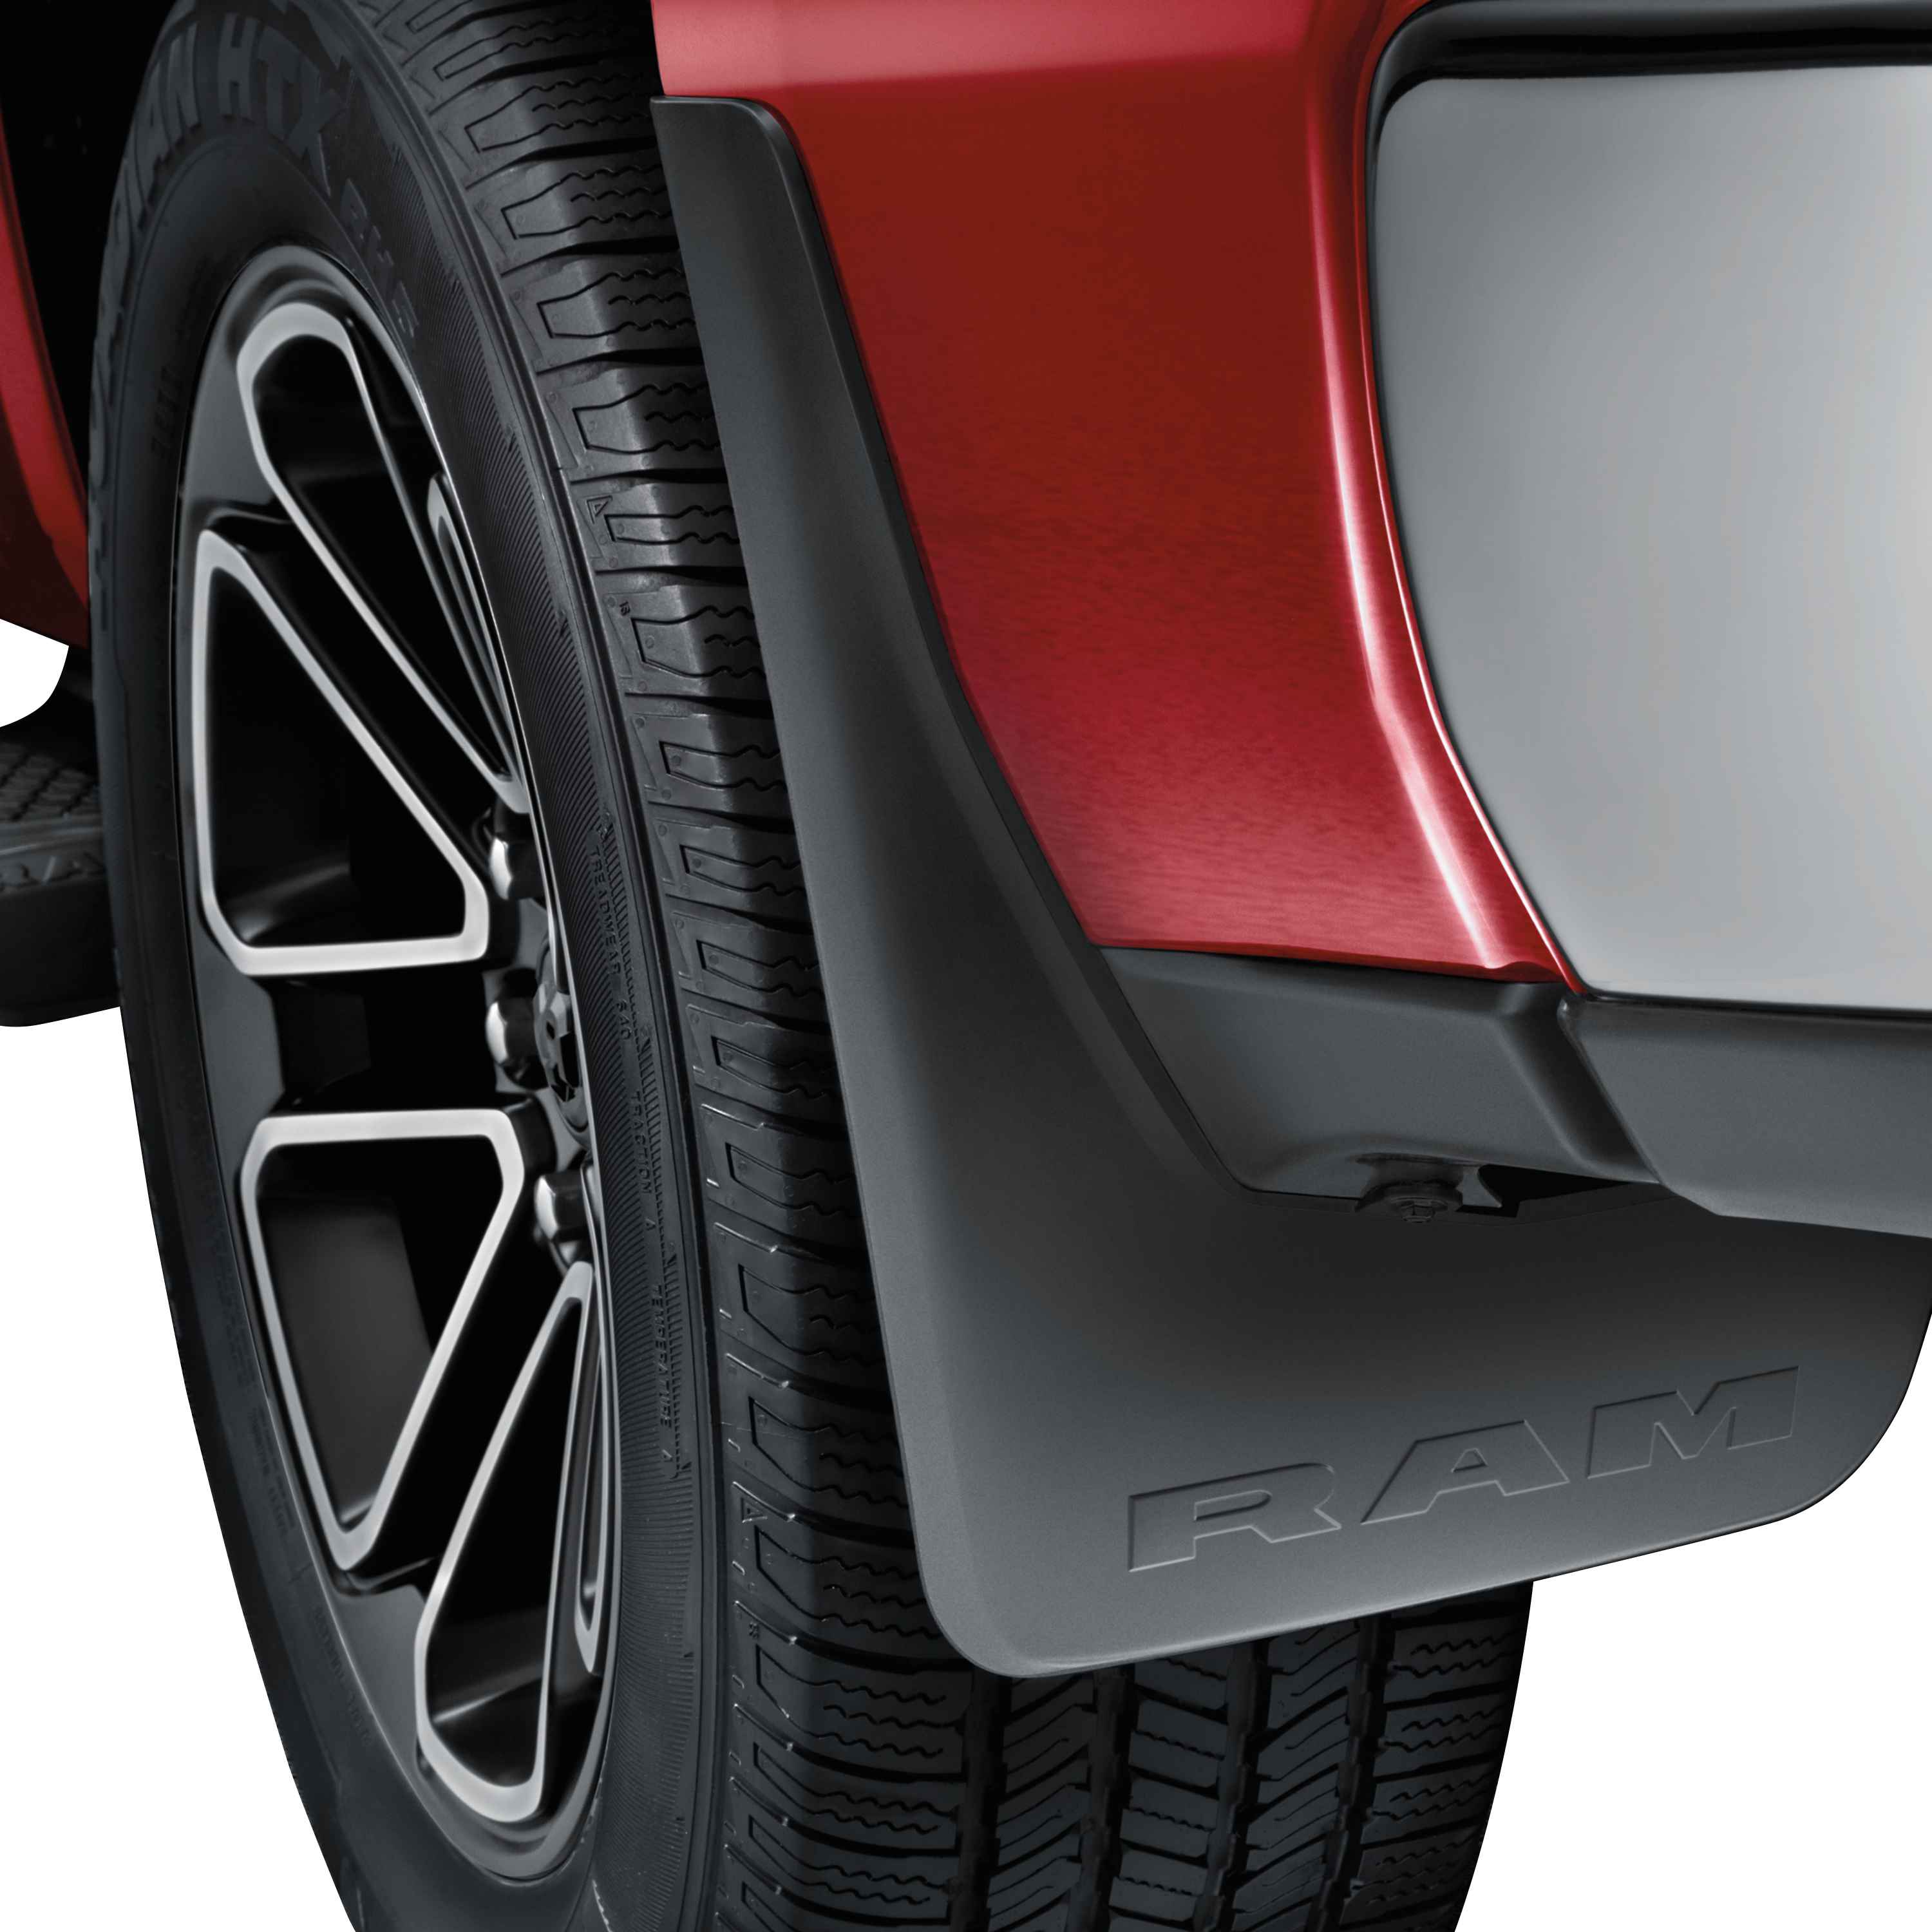 Splash Guards, Heavy-Duty Rubber Rear for Vehicles with production Fender Flares